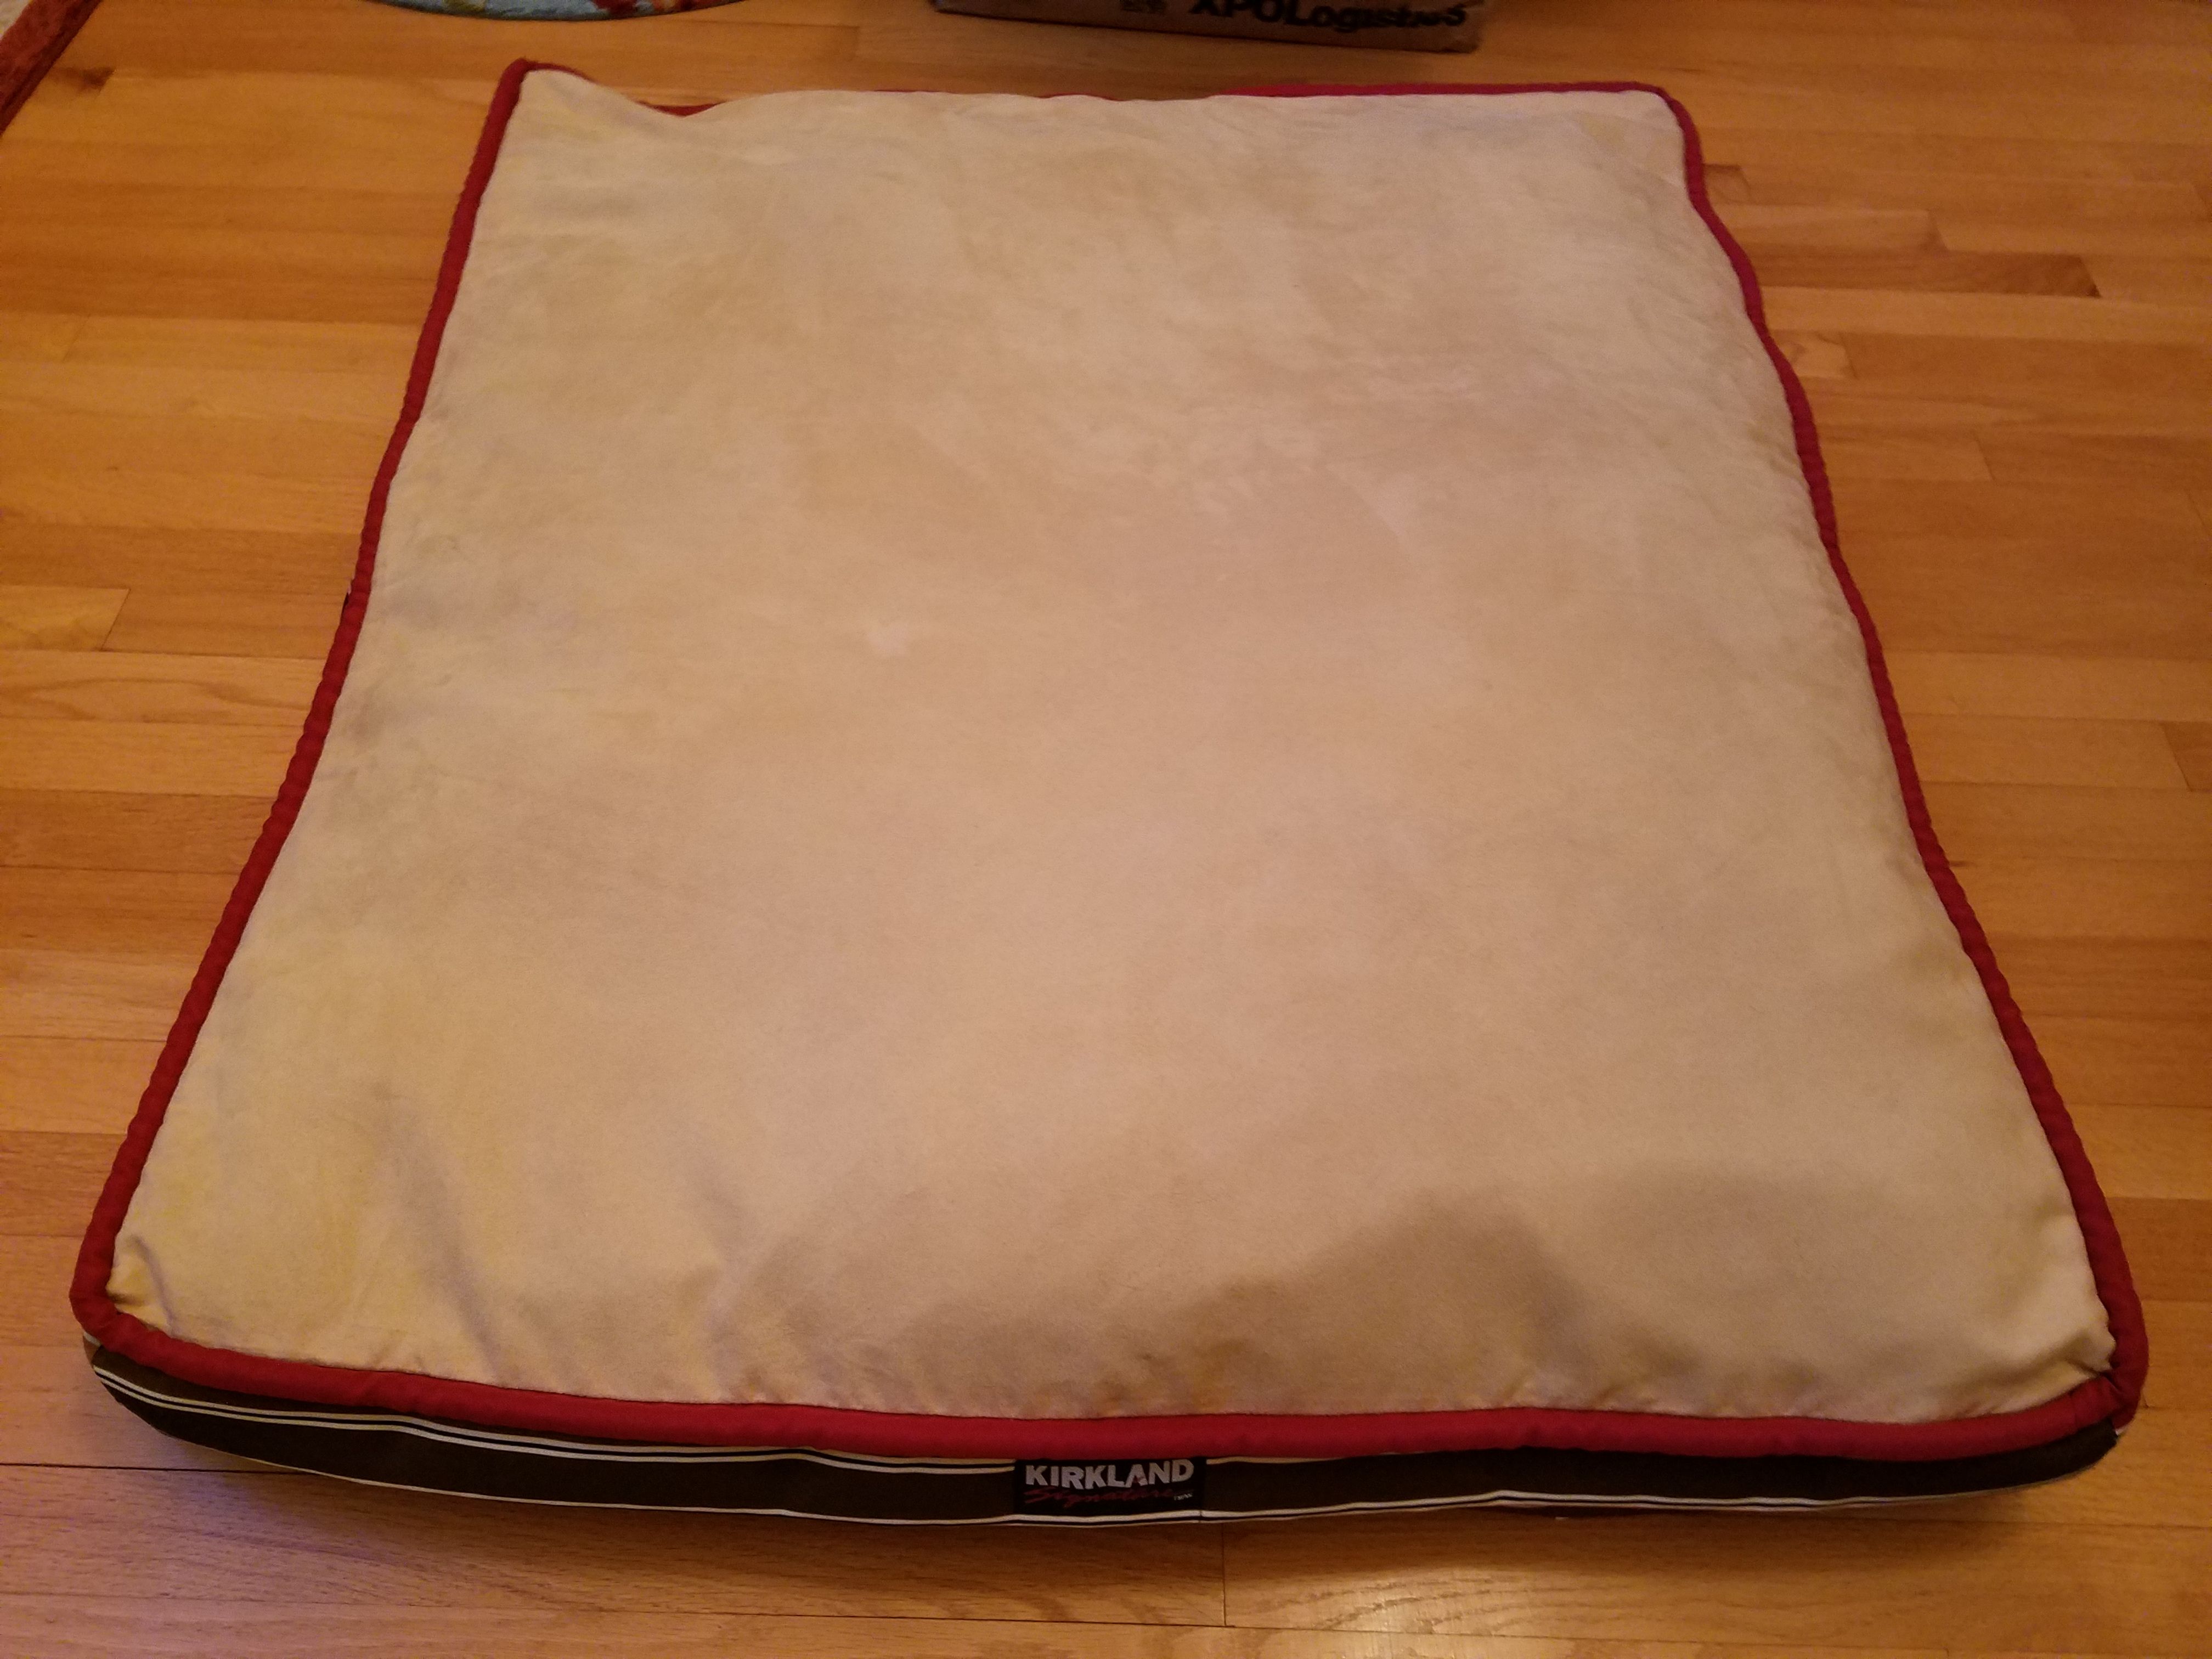 XL Pet Bed 40"x 35" x4" D Very Great condition